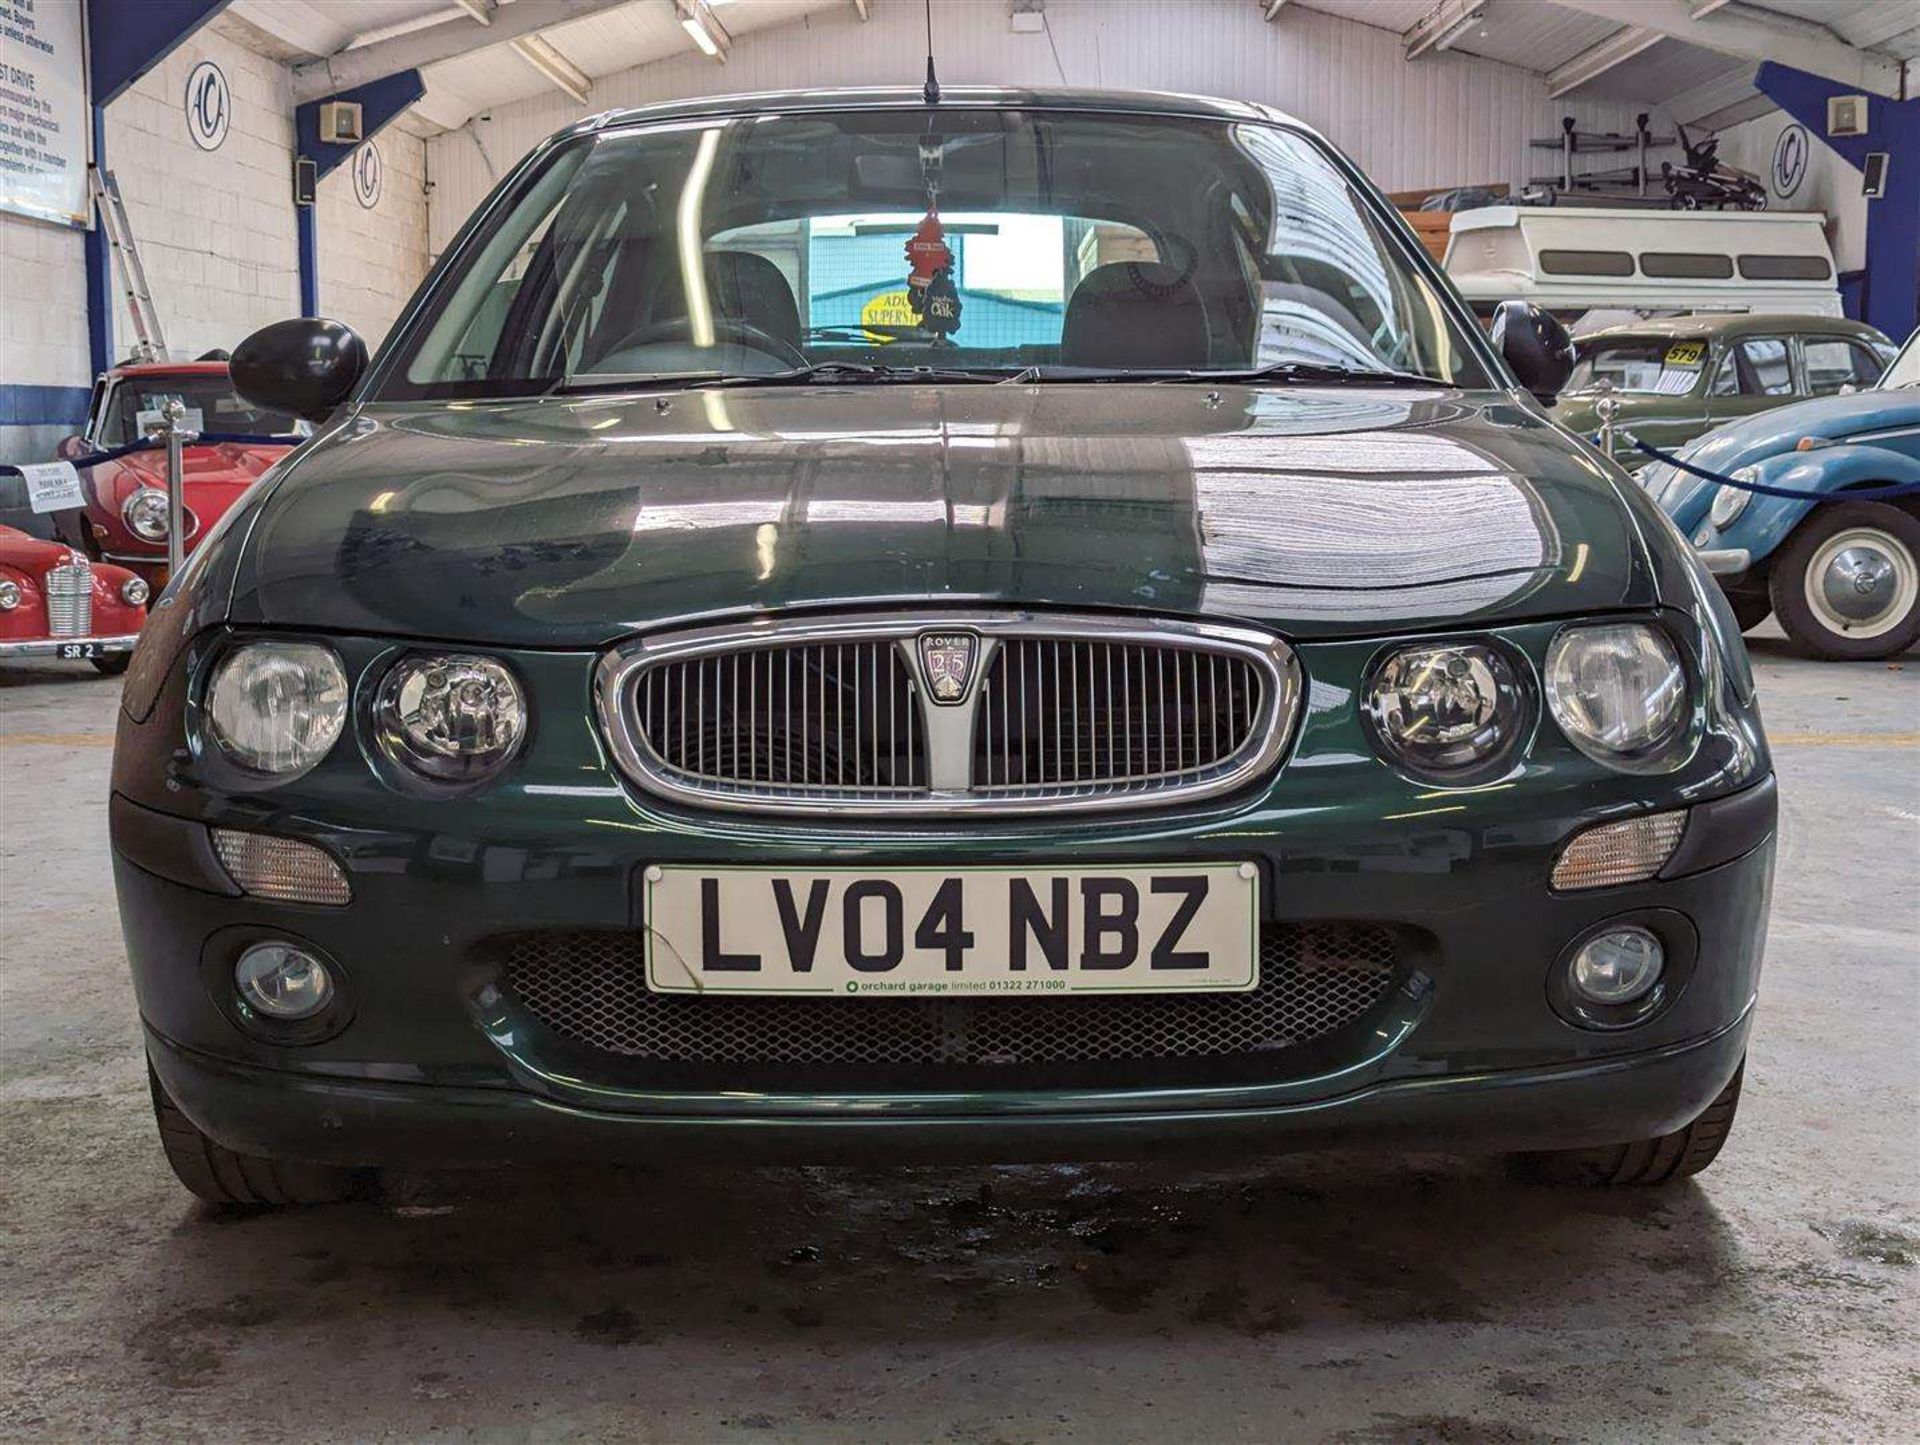 2004 ROVER 25 IMPRESSION S3 - Image 29 of 29